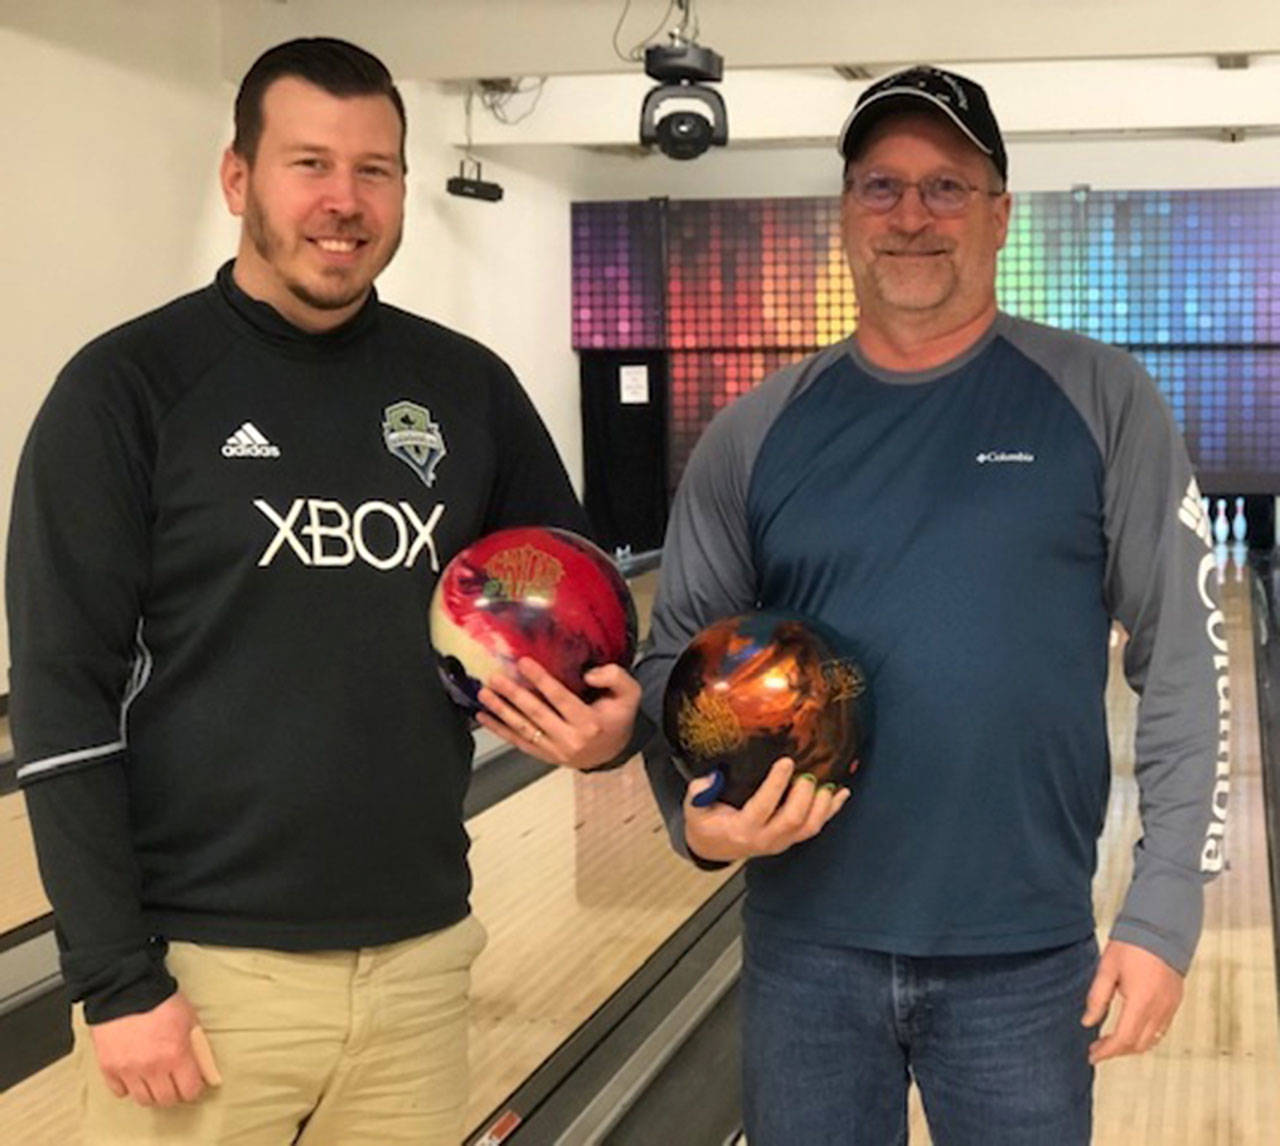 Ross Ramsdell, left, and James Ehlert each bowled a 300 game at the Whidbey Island USBC tournament earlier this month. (Submitted photo)